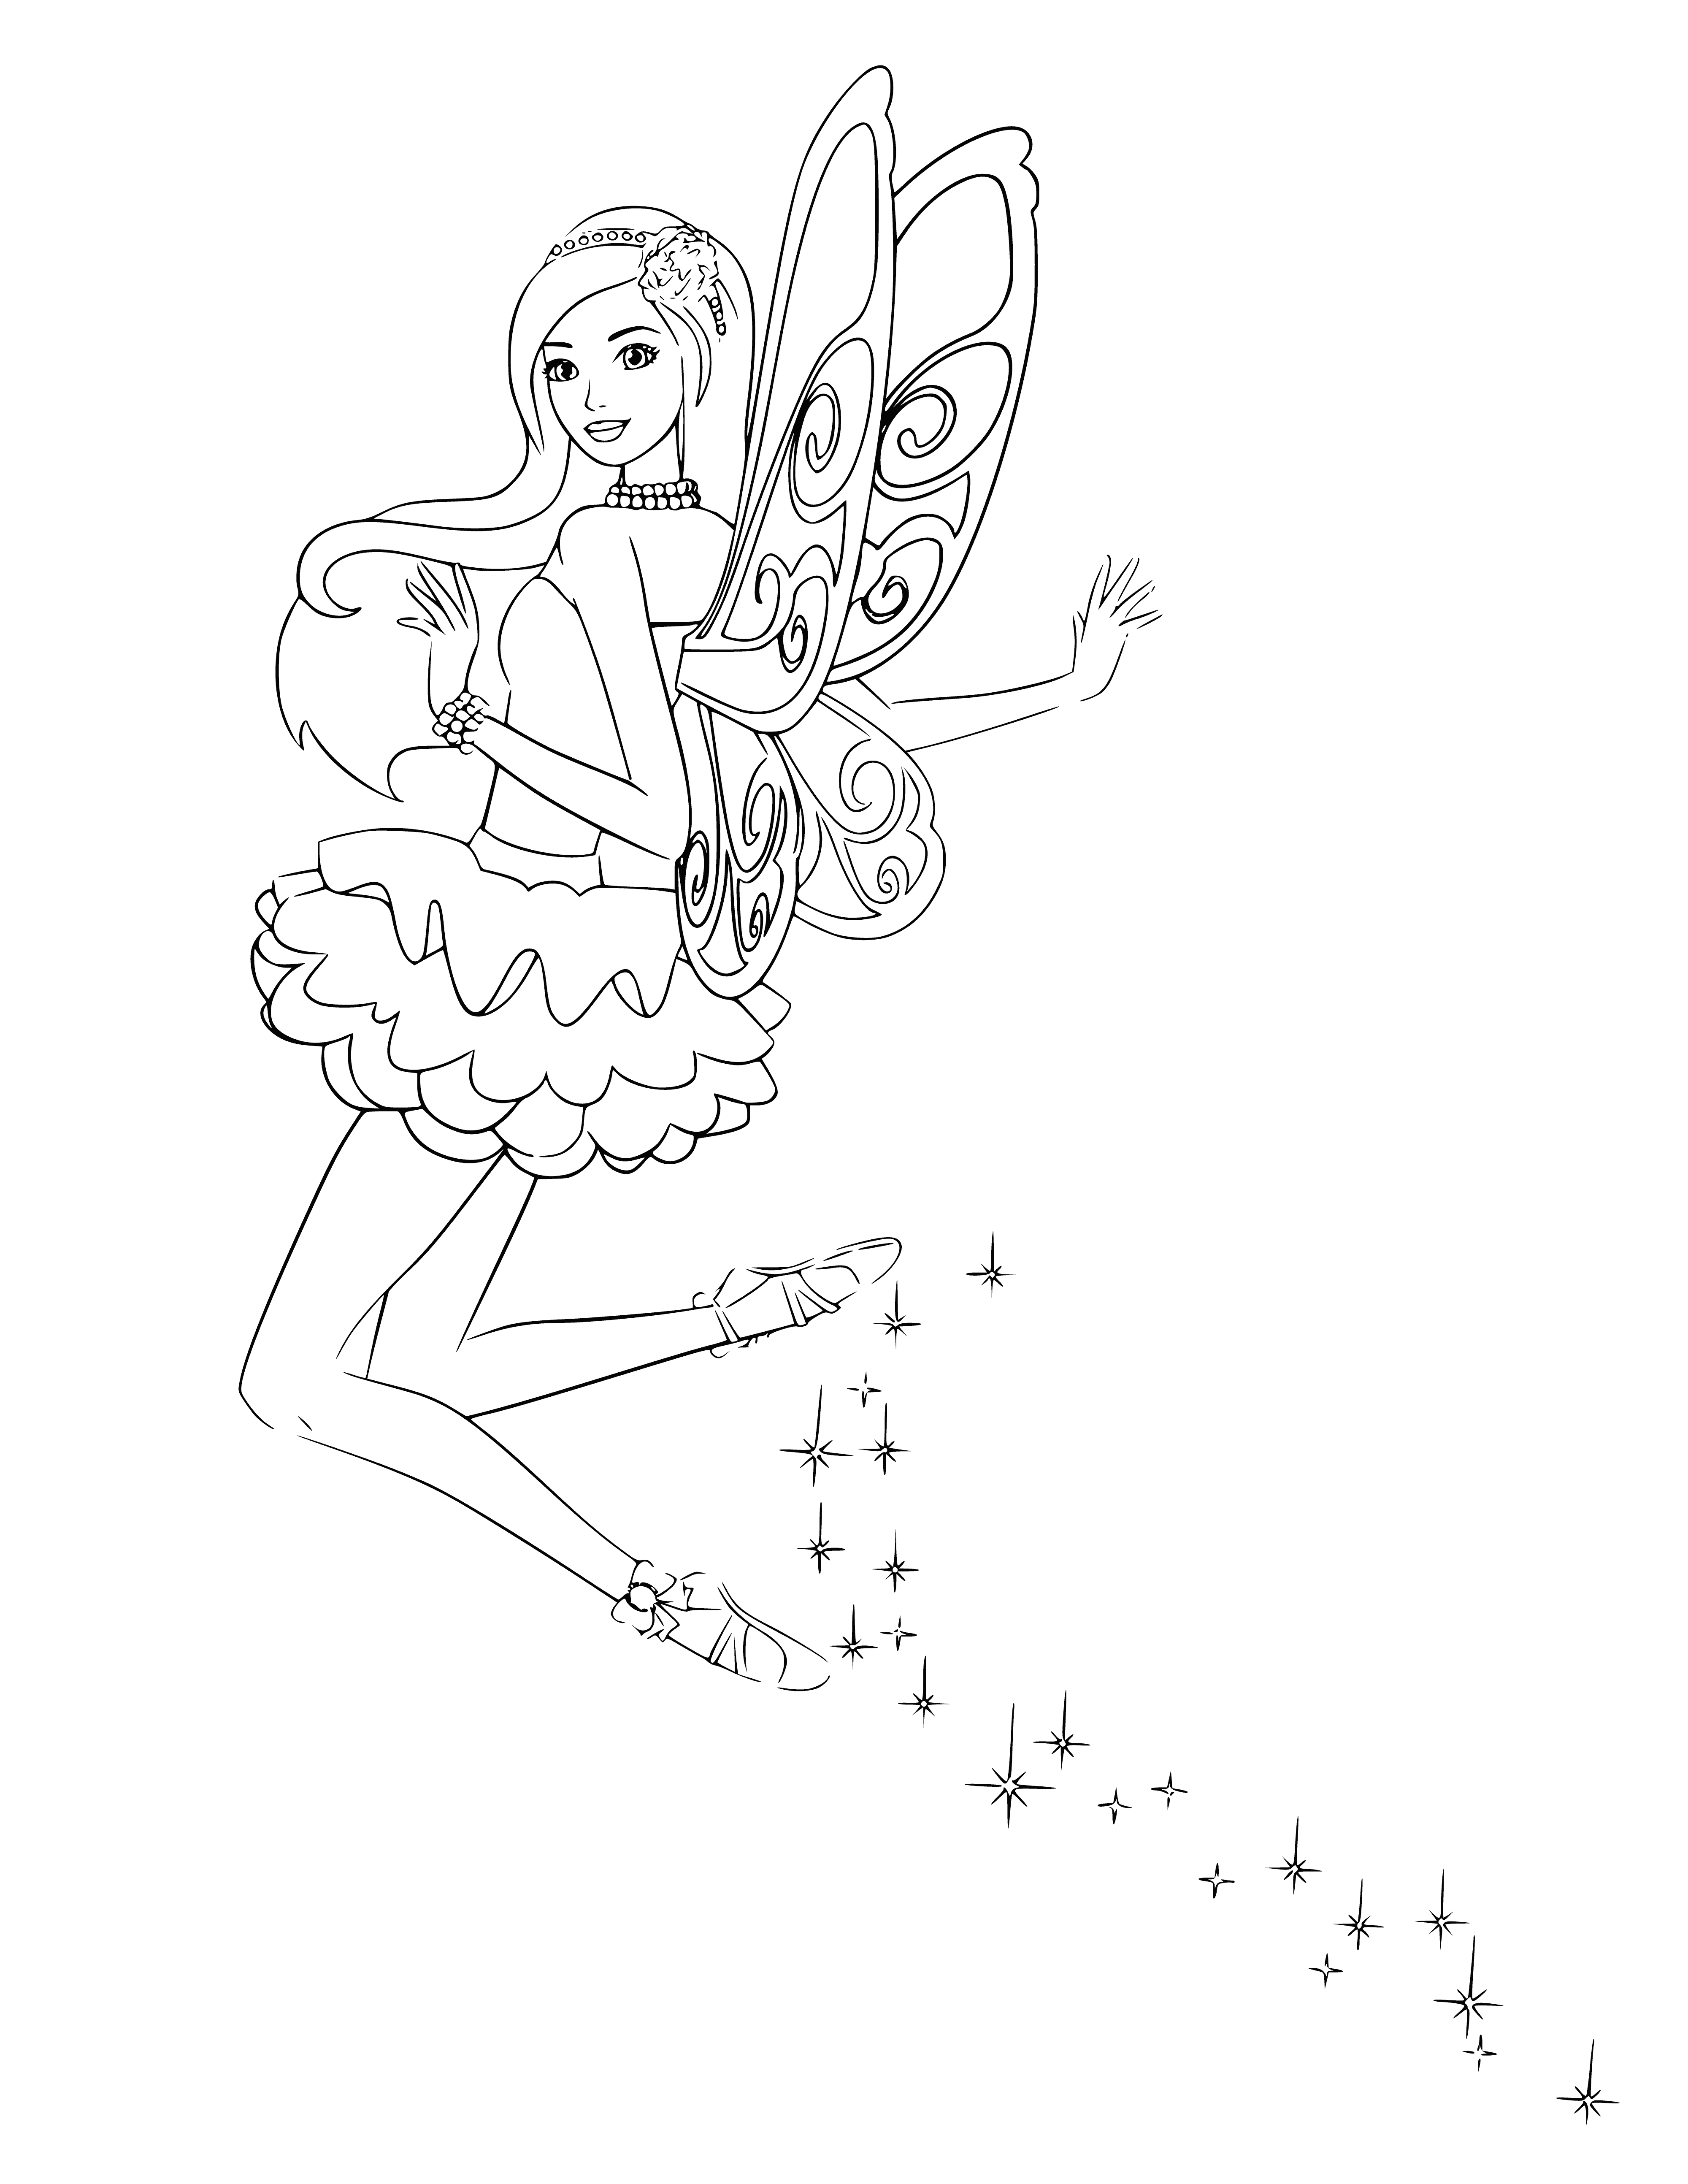 coloring page: Barbie doll with pink/purple wings, dress, and tiara standing on a cloud; hair blonde/sparkles.